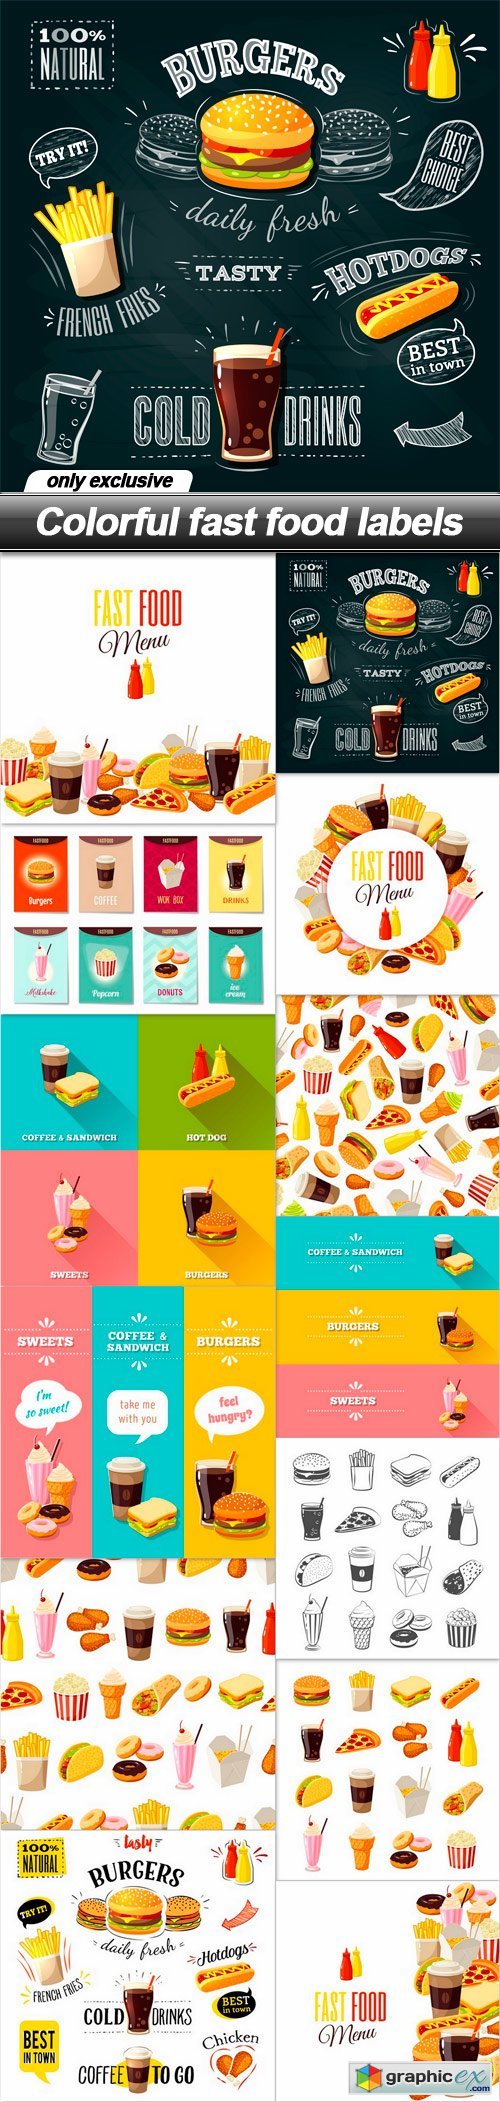 Colorful fast food labels - 13 EPS